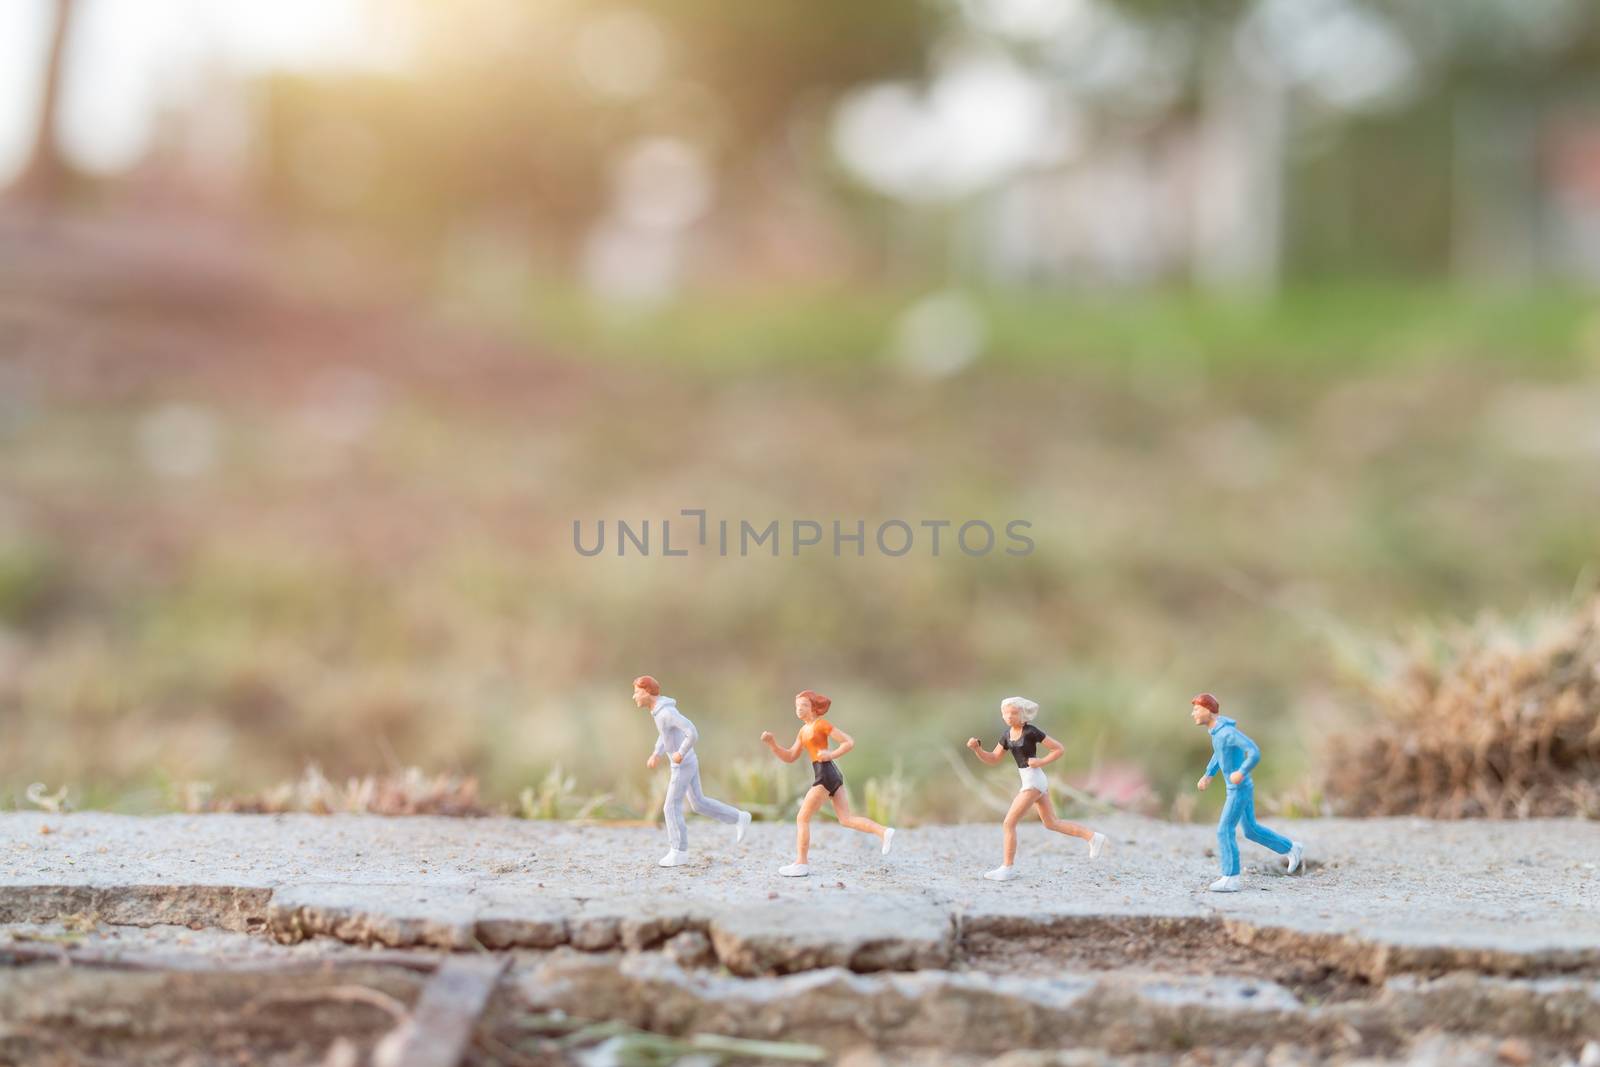 Miniature people : Running on the road with nature background  by sirichaiyaymicro